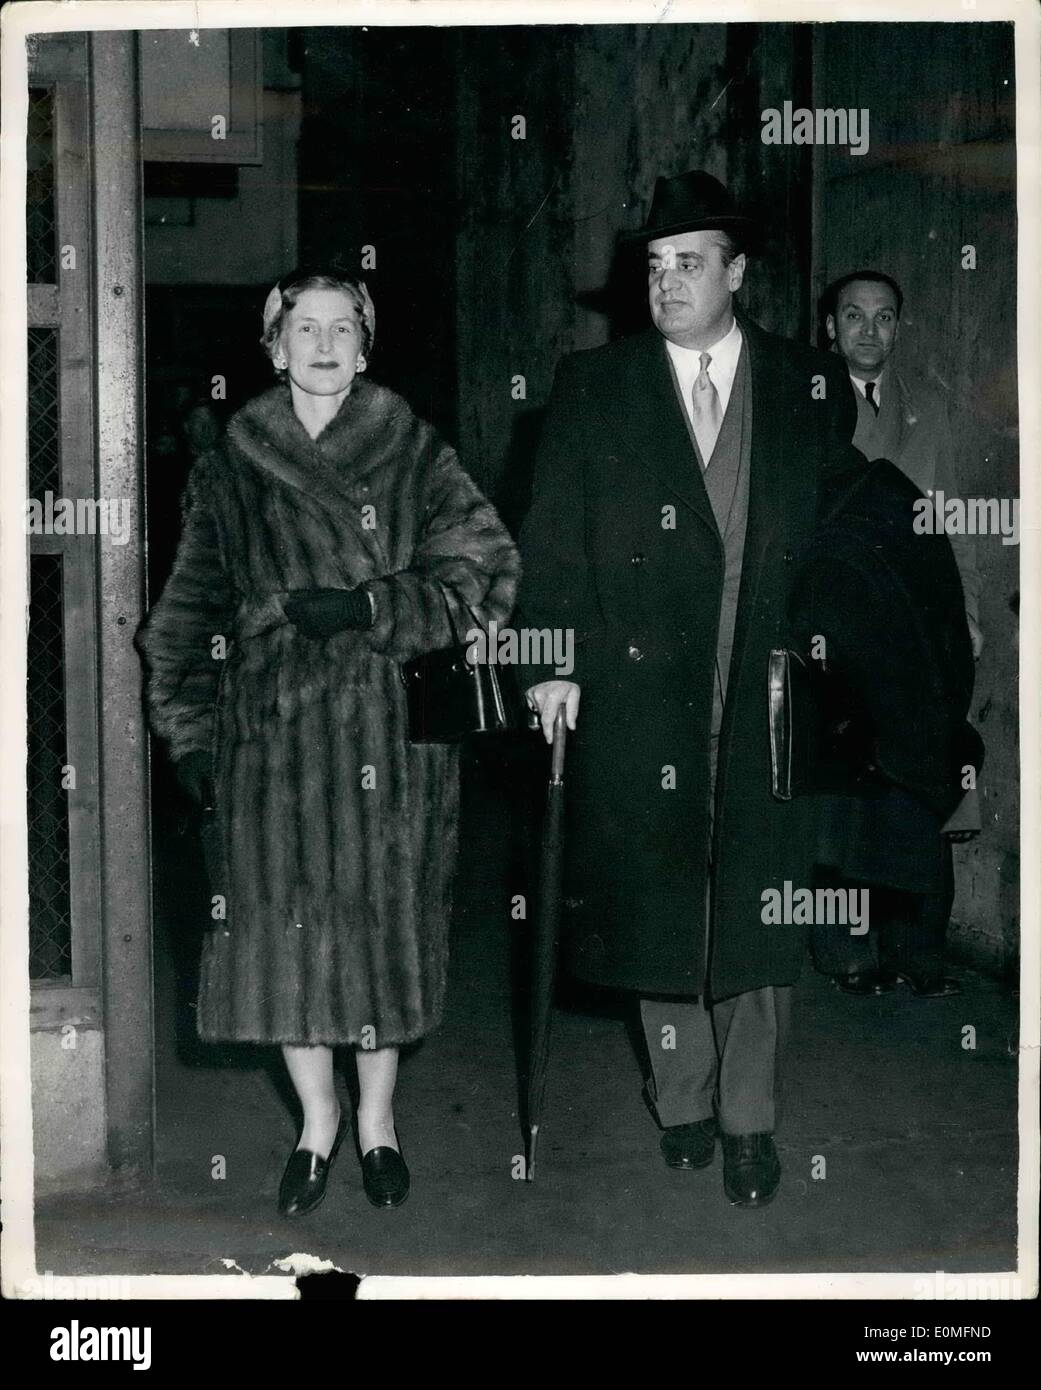 Mar. 03, 1955 - Frau Schlitter returns to London. German Government apologised for her Speech.: Frau Daisy Schlitter and her husband German Diplomant Herr Oskar Schlitter - returned to London last night from West Germany . They were recalled to Germany after a speech by Frau Schlitter in London at Christmas - and the West German Government apologised to Britain for the remarks made by Frau Daisy. They were met by their son Alexander and daughter Marion who remained in London when the diplomat and his wife returned to Germany Stock Photo